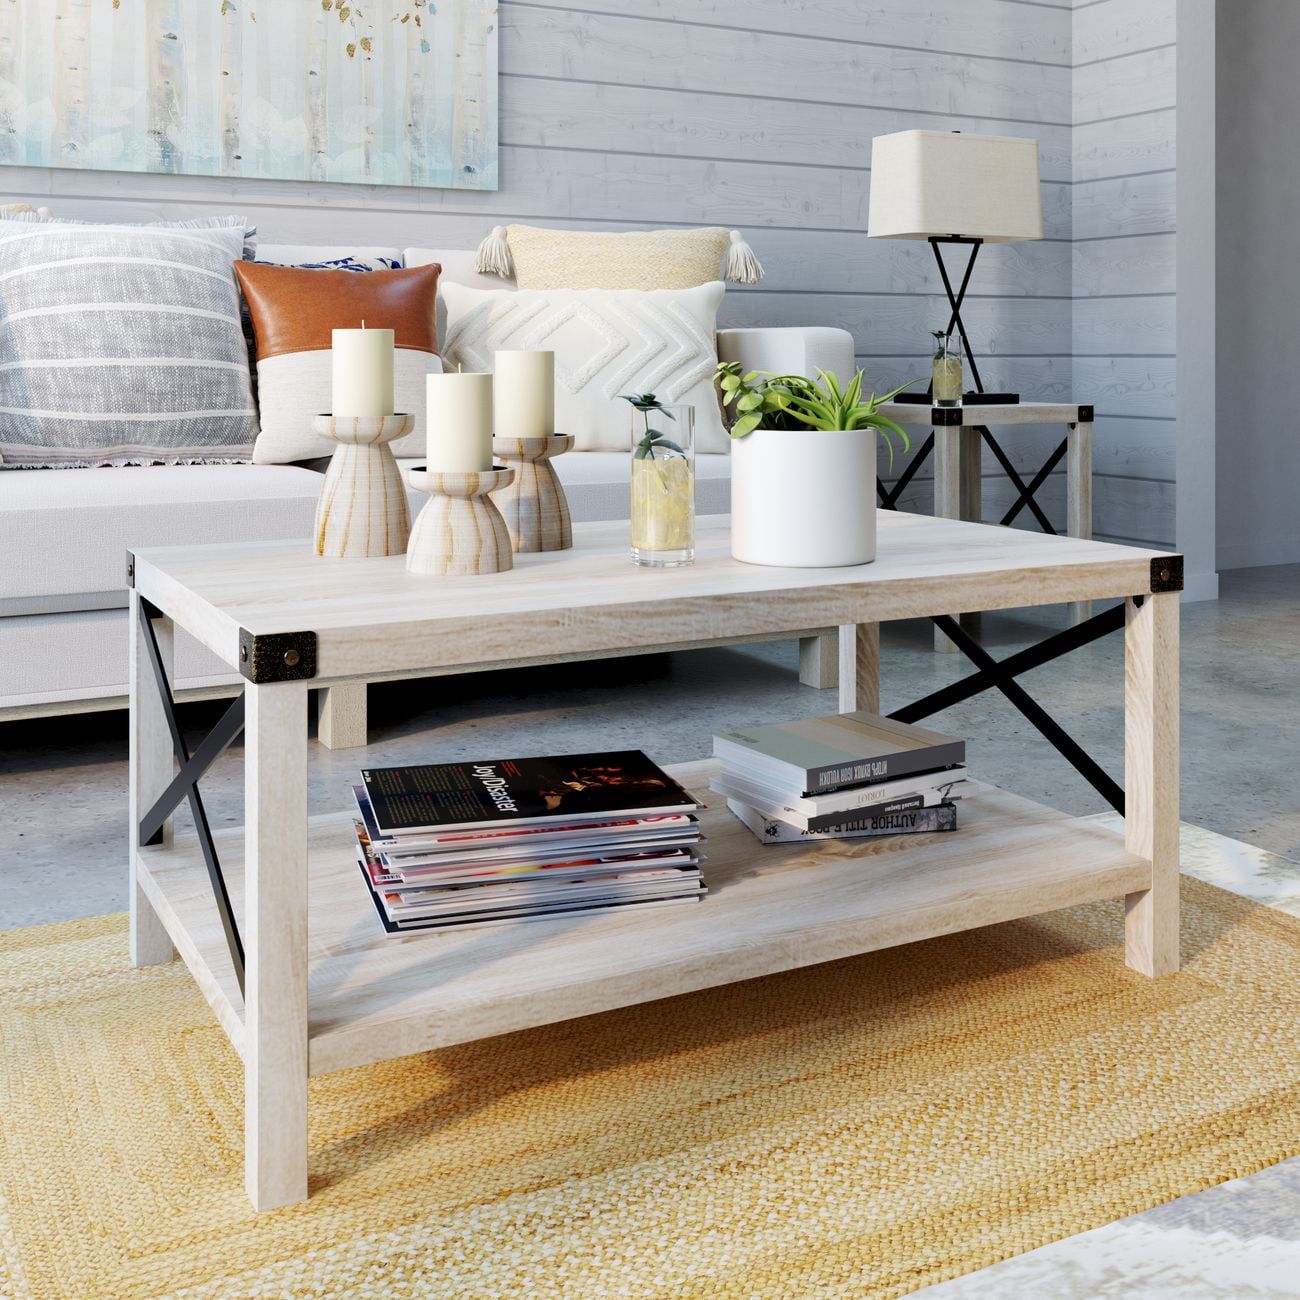 Woven Paths Magnolia Metal X Coffee Table, White Oak – Walmart Within Woven Paths Coffee Tables (Photo 1 of 15)